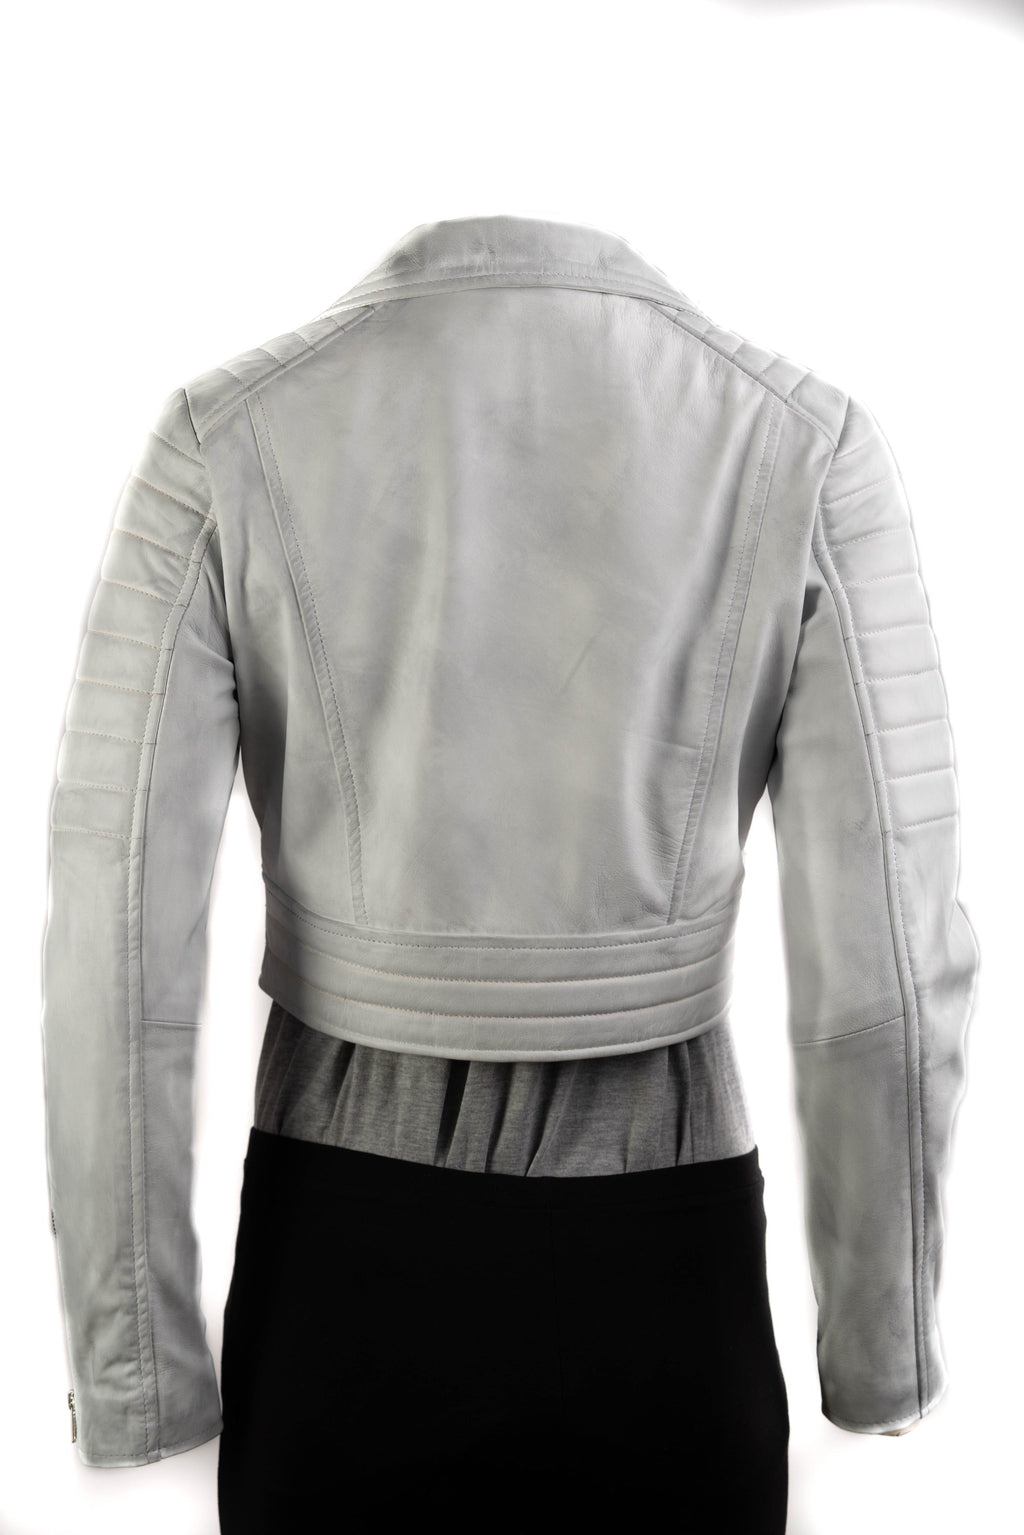 Ladies Antique White Cropped Leather Biker Style Jacket: Concetta